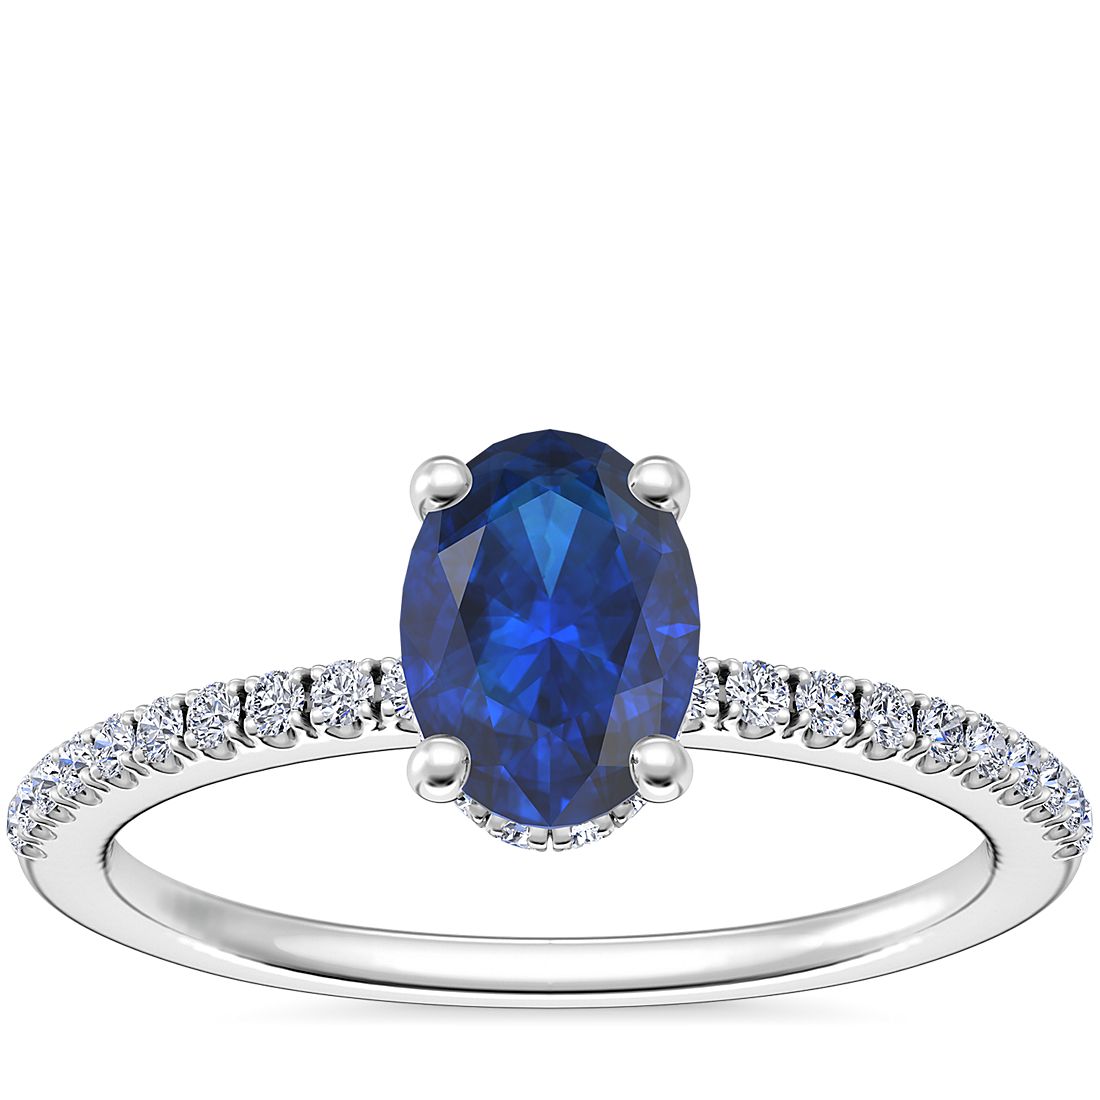 Petite Micropavé Hidden Halo Engagement Ring with Oval Sapphire in Platinum (7x5mm)